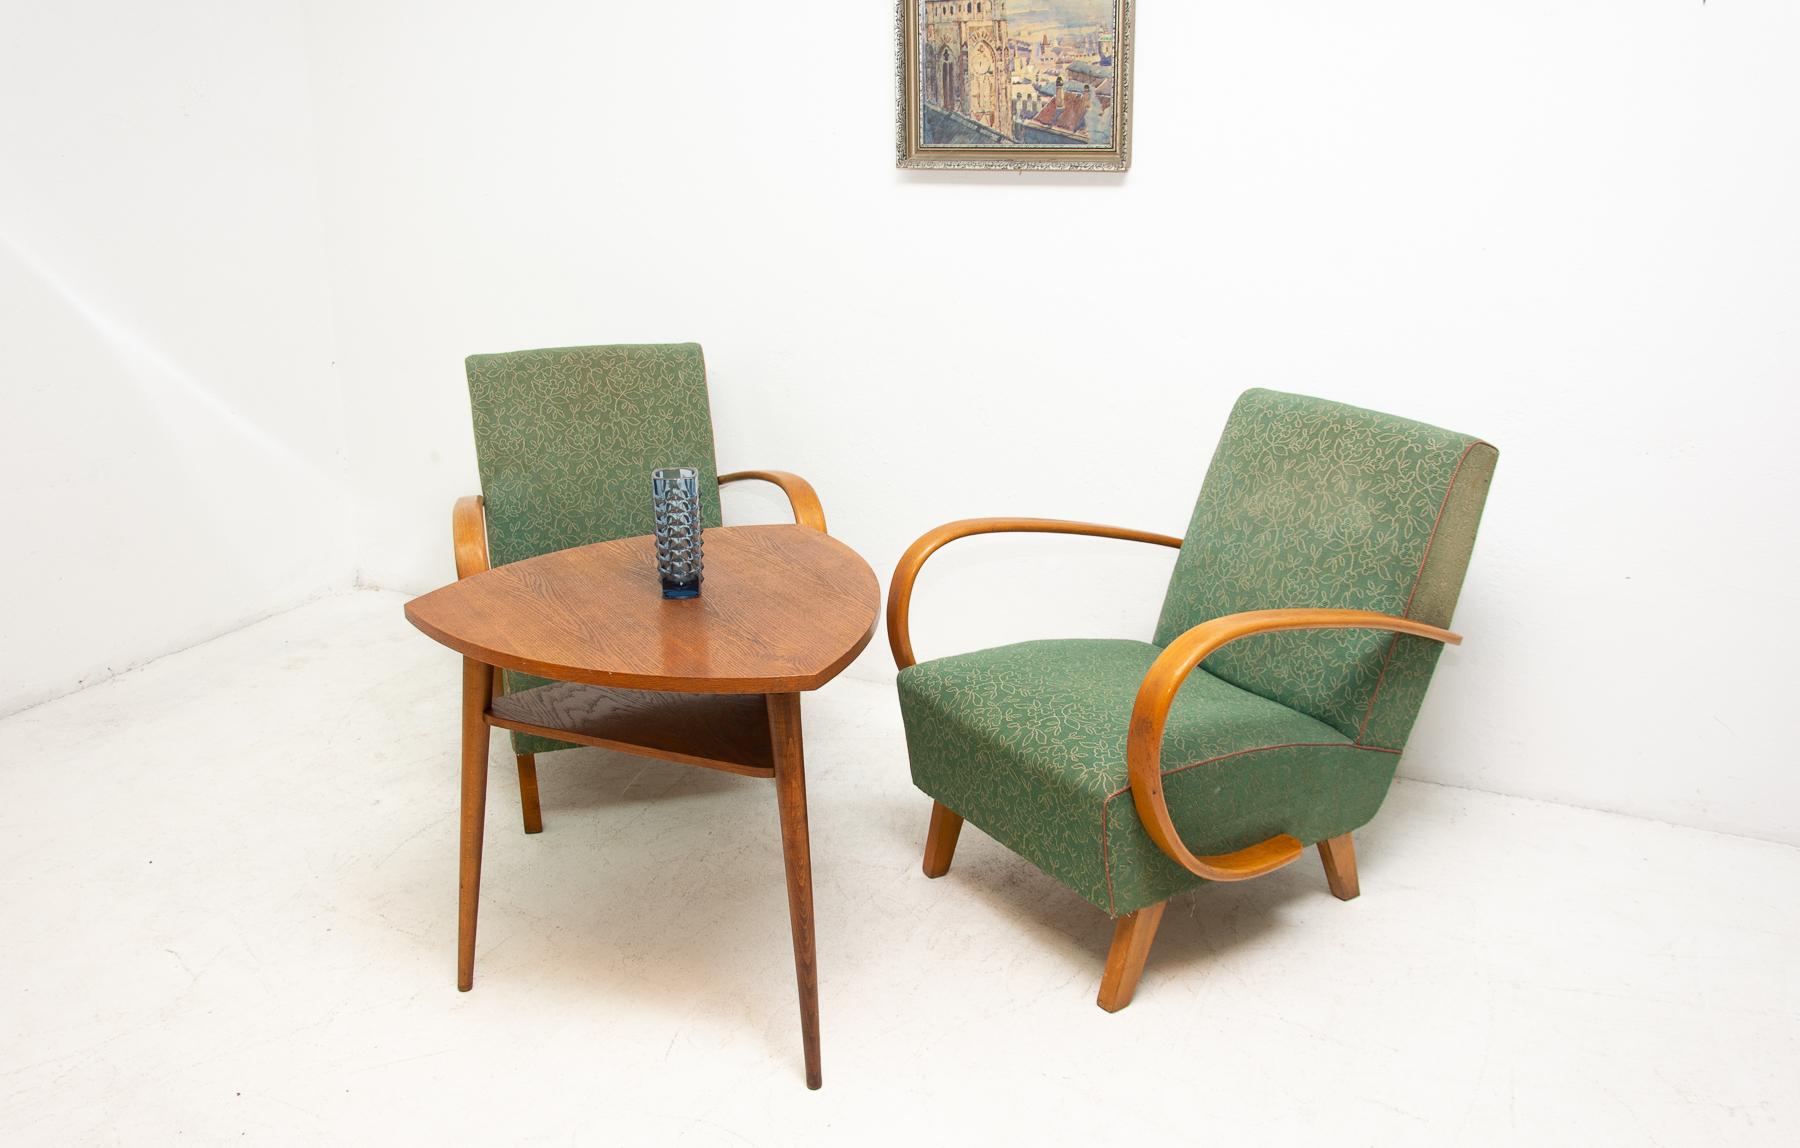 This pair of bentwood armchairs “C” was designed by Jindrich Halabala and were produced by UP Závody in the 1950s. The chairs are stabile and comfortable. The structure and upholstery are in good vintage condition, bearing signs of age and using.